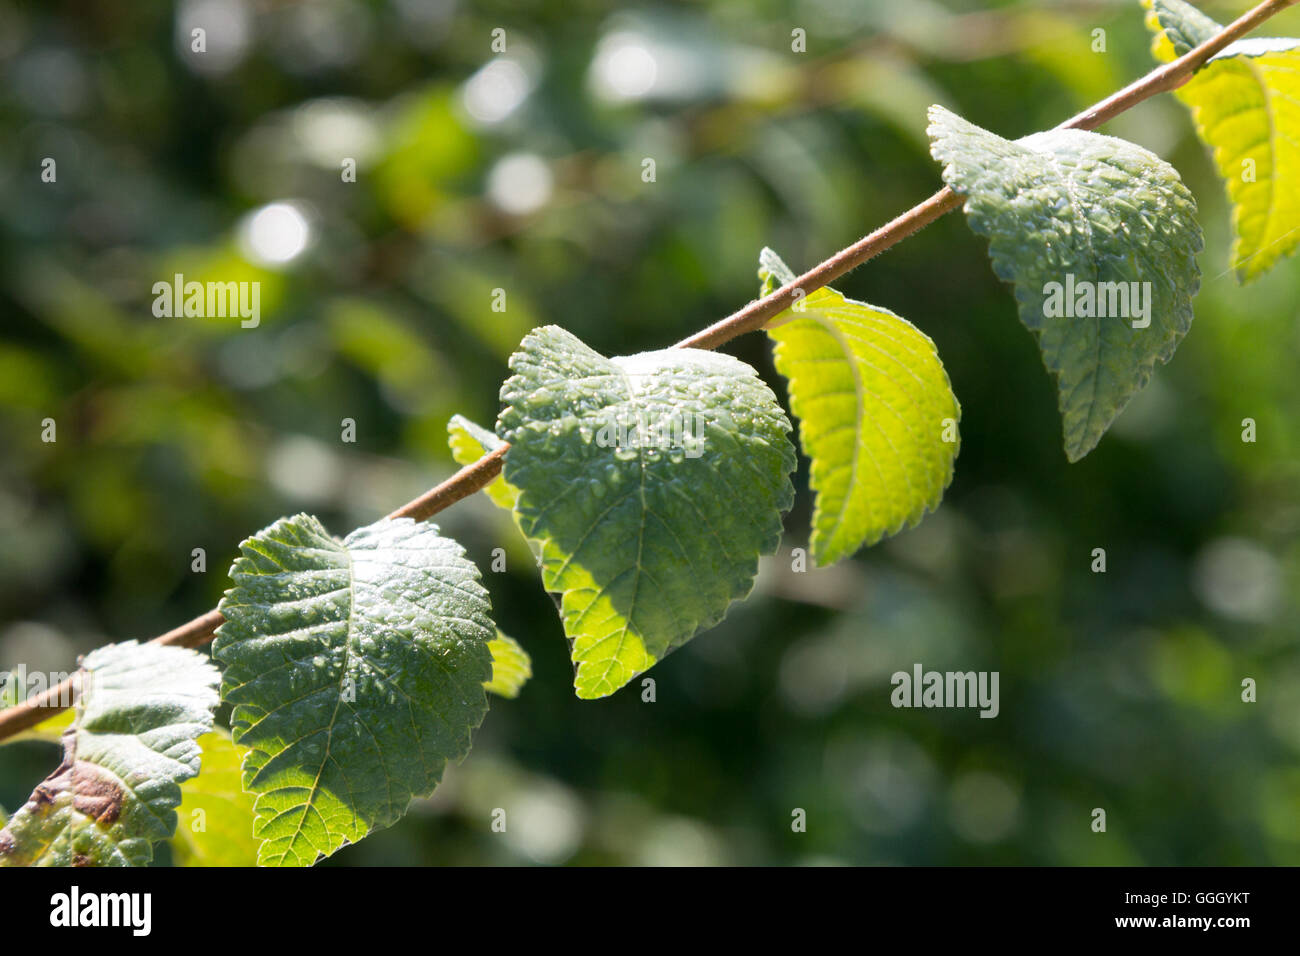 Leaves with drops of water on a vine Stock Photo